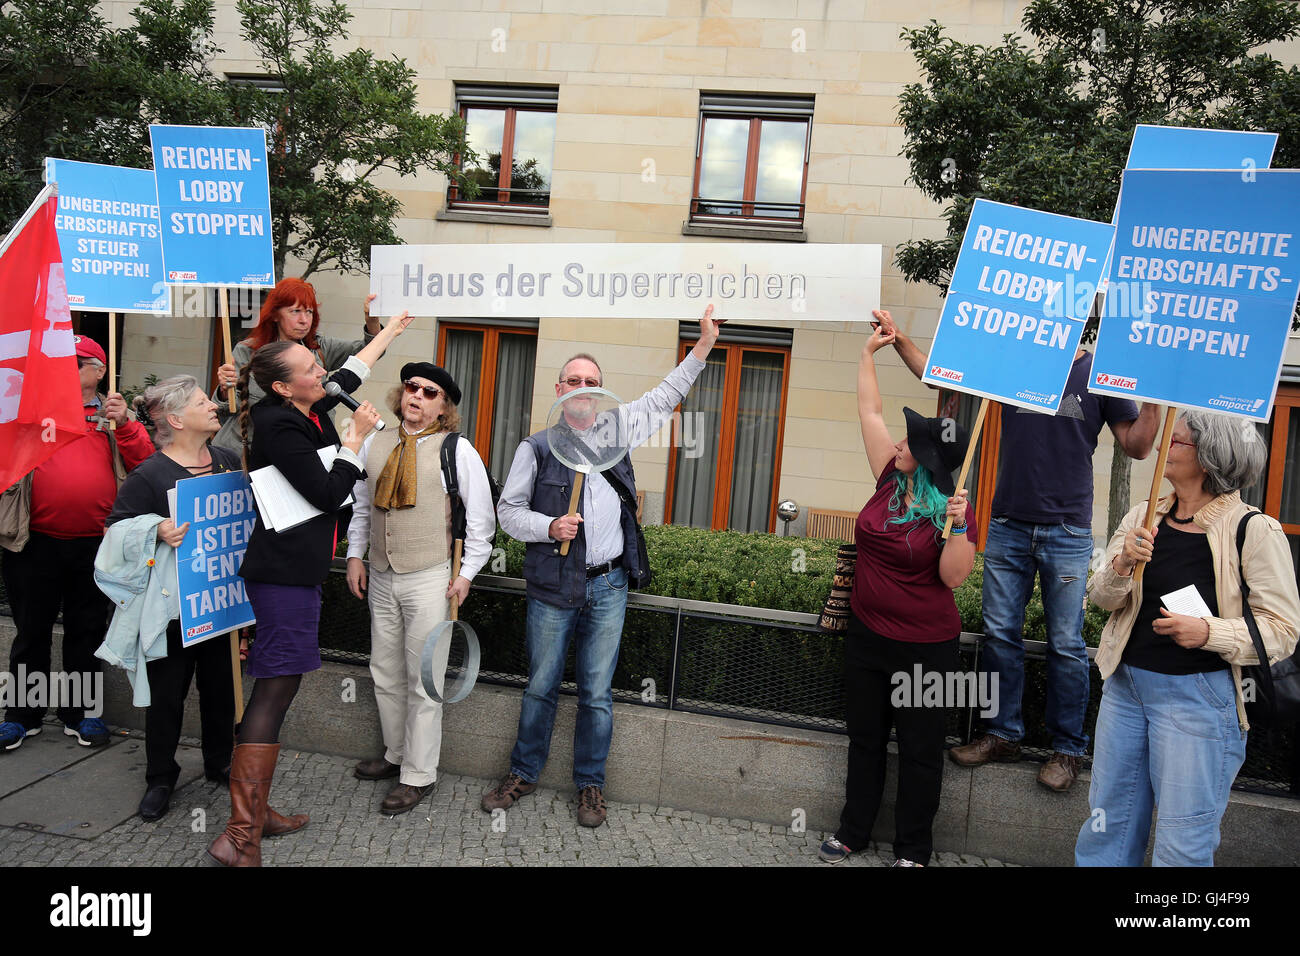 Berlin, Germany. 11th Aug, 2016. People participating in a protest against loop holes for rich people in the inheritance tax organised by the organisations Verdi, attac, Campact and others in front of 'Haus des Familienunternehmens' (lit. 'House of the Family Business') in Berlin, Germany, 11 August 2016. PHOTO: WOLFGANG KUMM/dpa/Alamy Live News Stock Photo